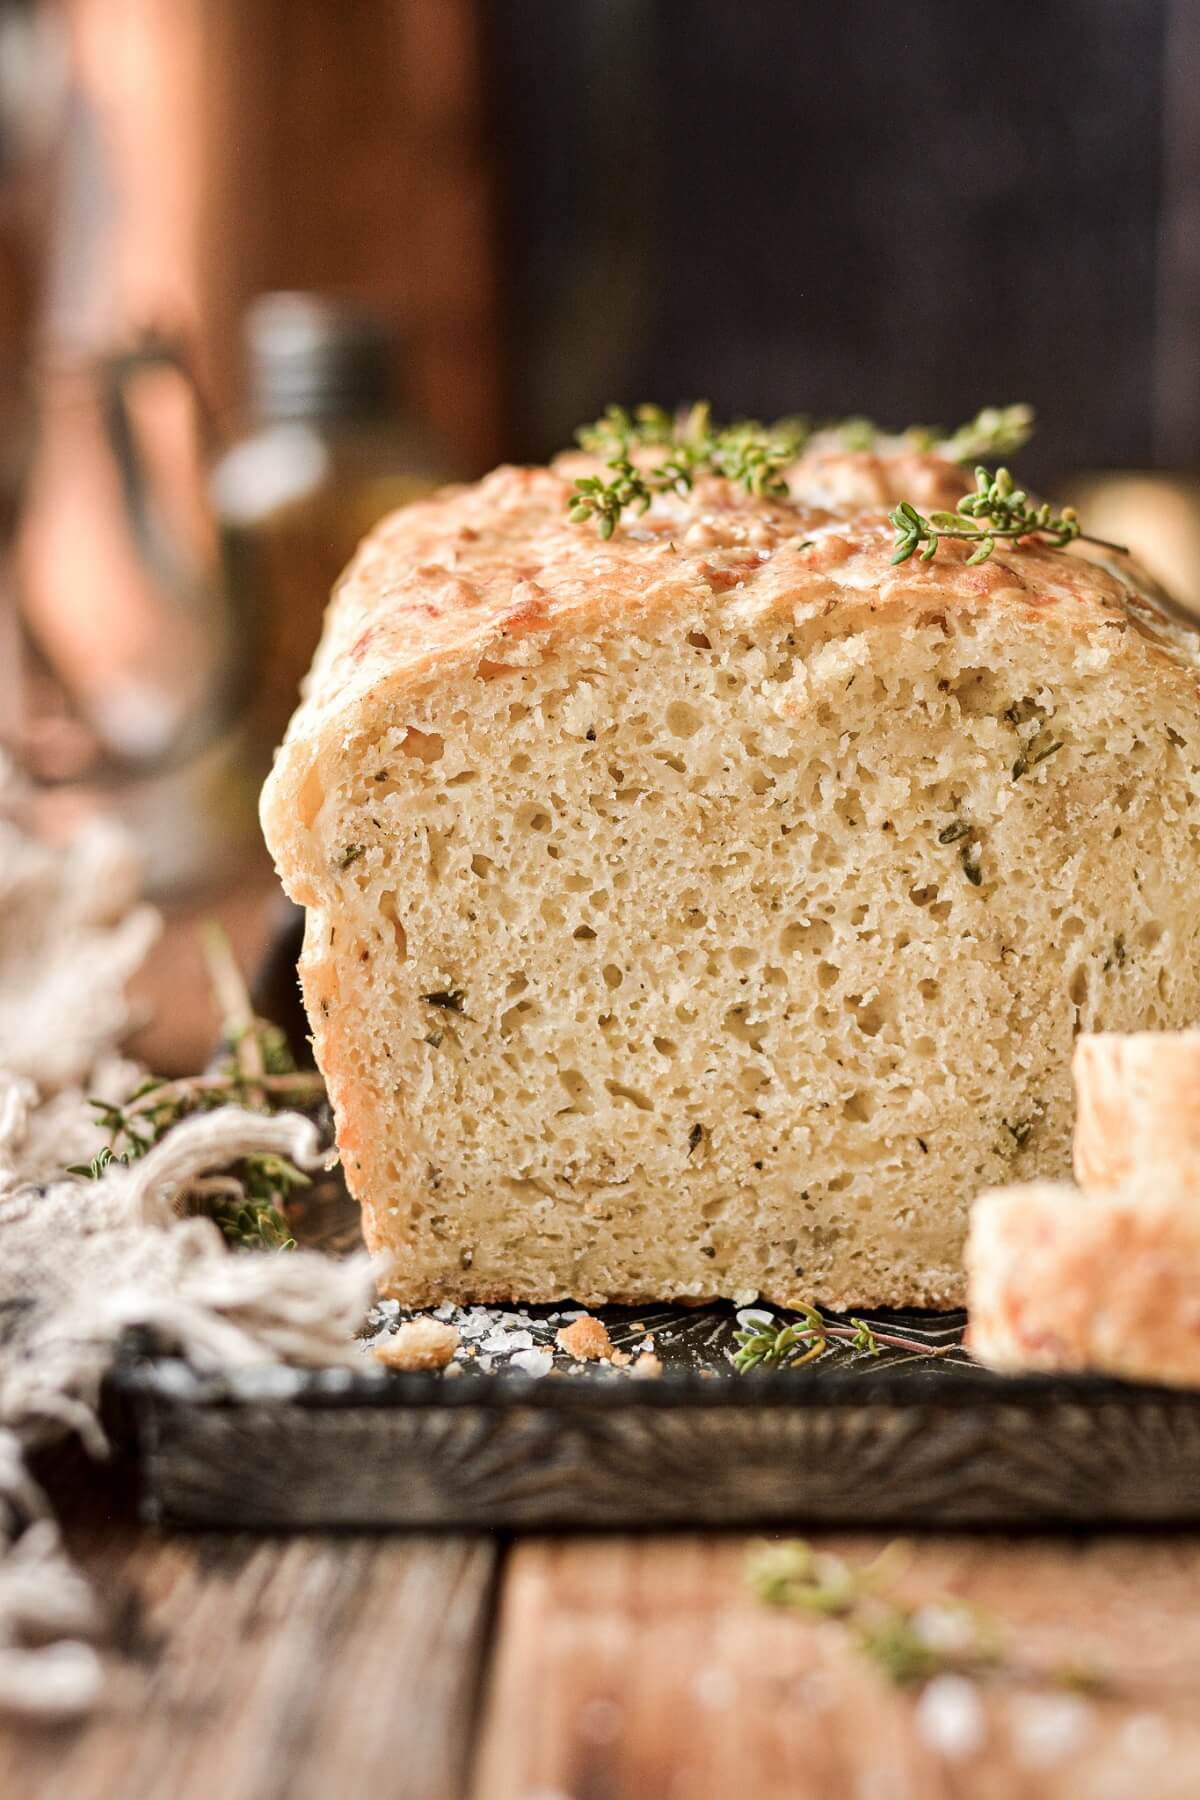 Buttermilk herb bread with a slice cut.